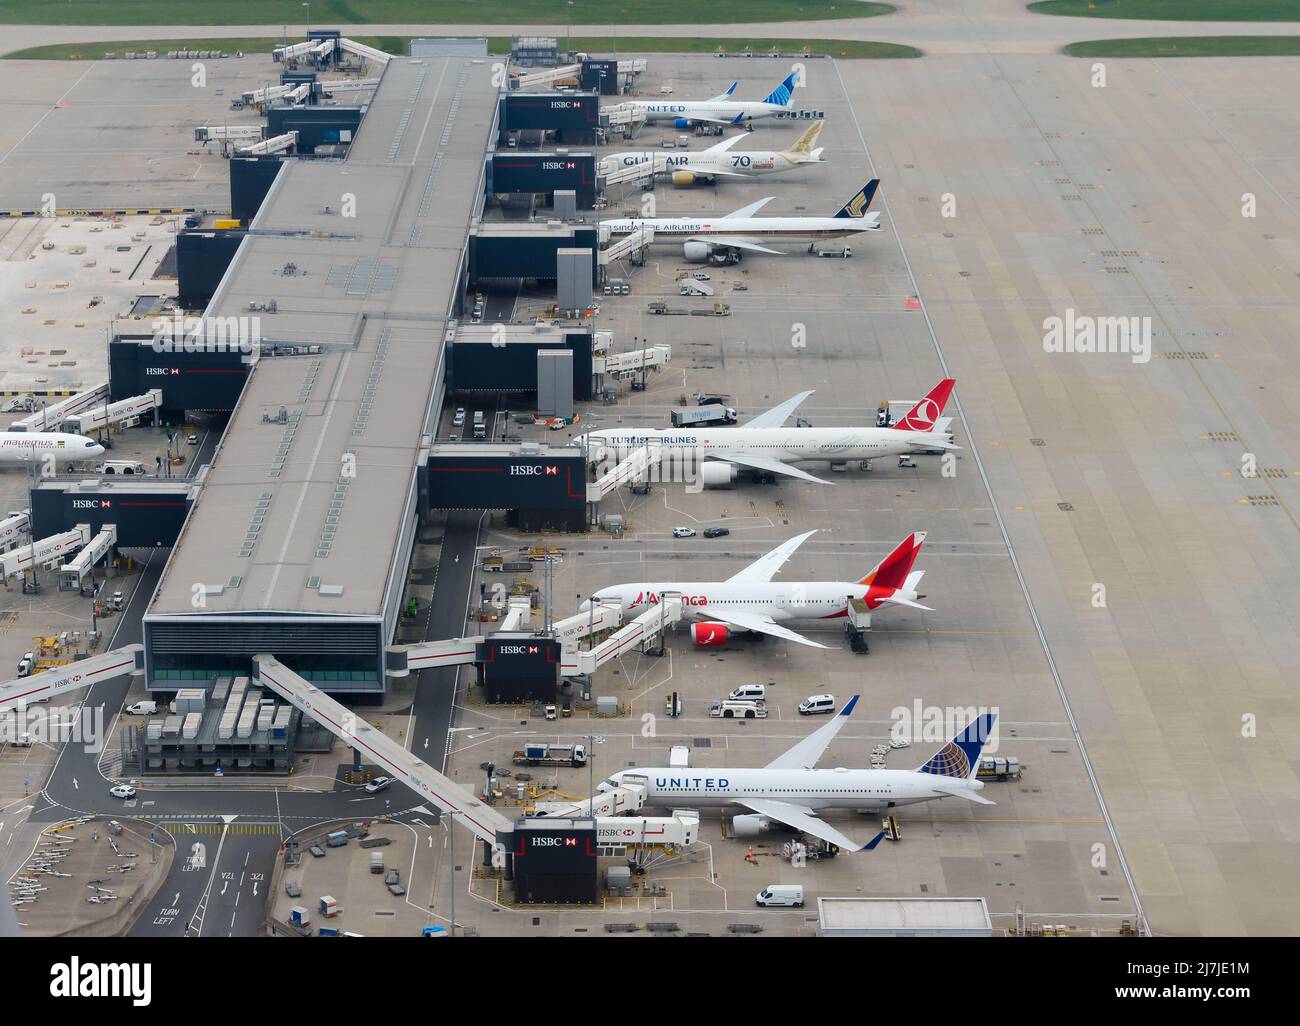 Heathrow Airport Terminal 2 aerial view, also know as The Queen's Terminal. Busy airport terminal in United Kingdom with multiple aircraft. Stock Photo